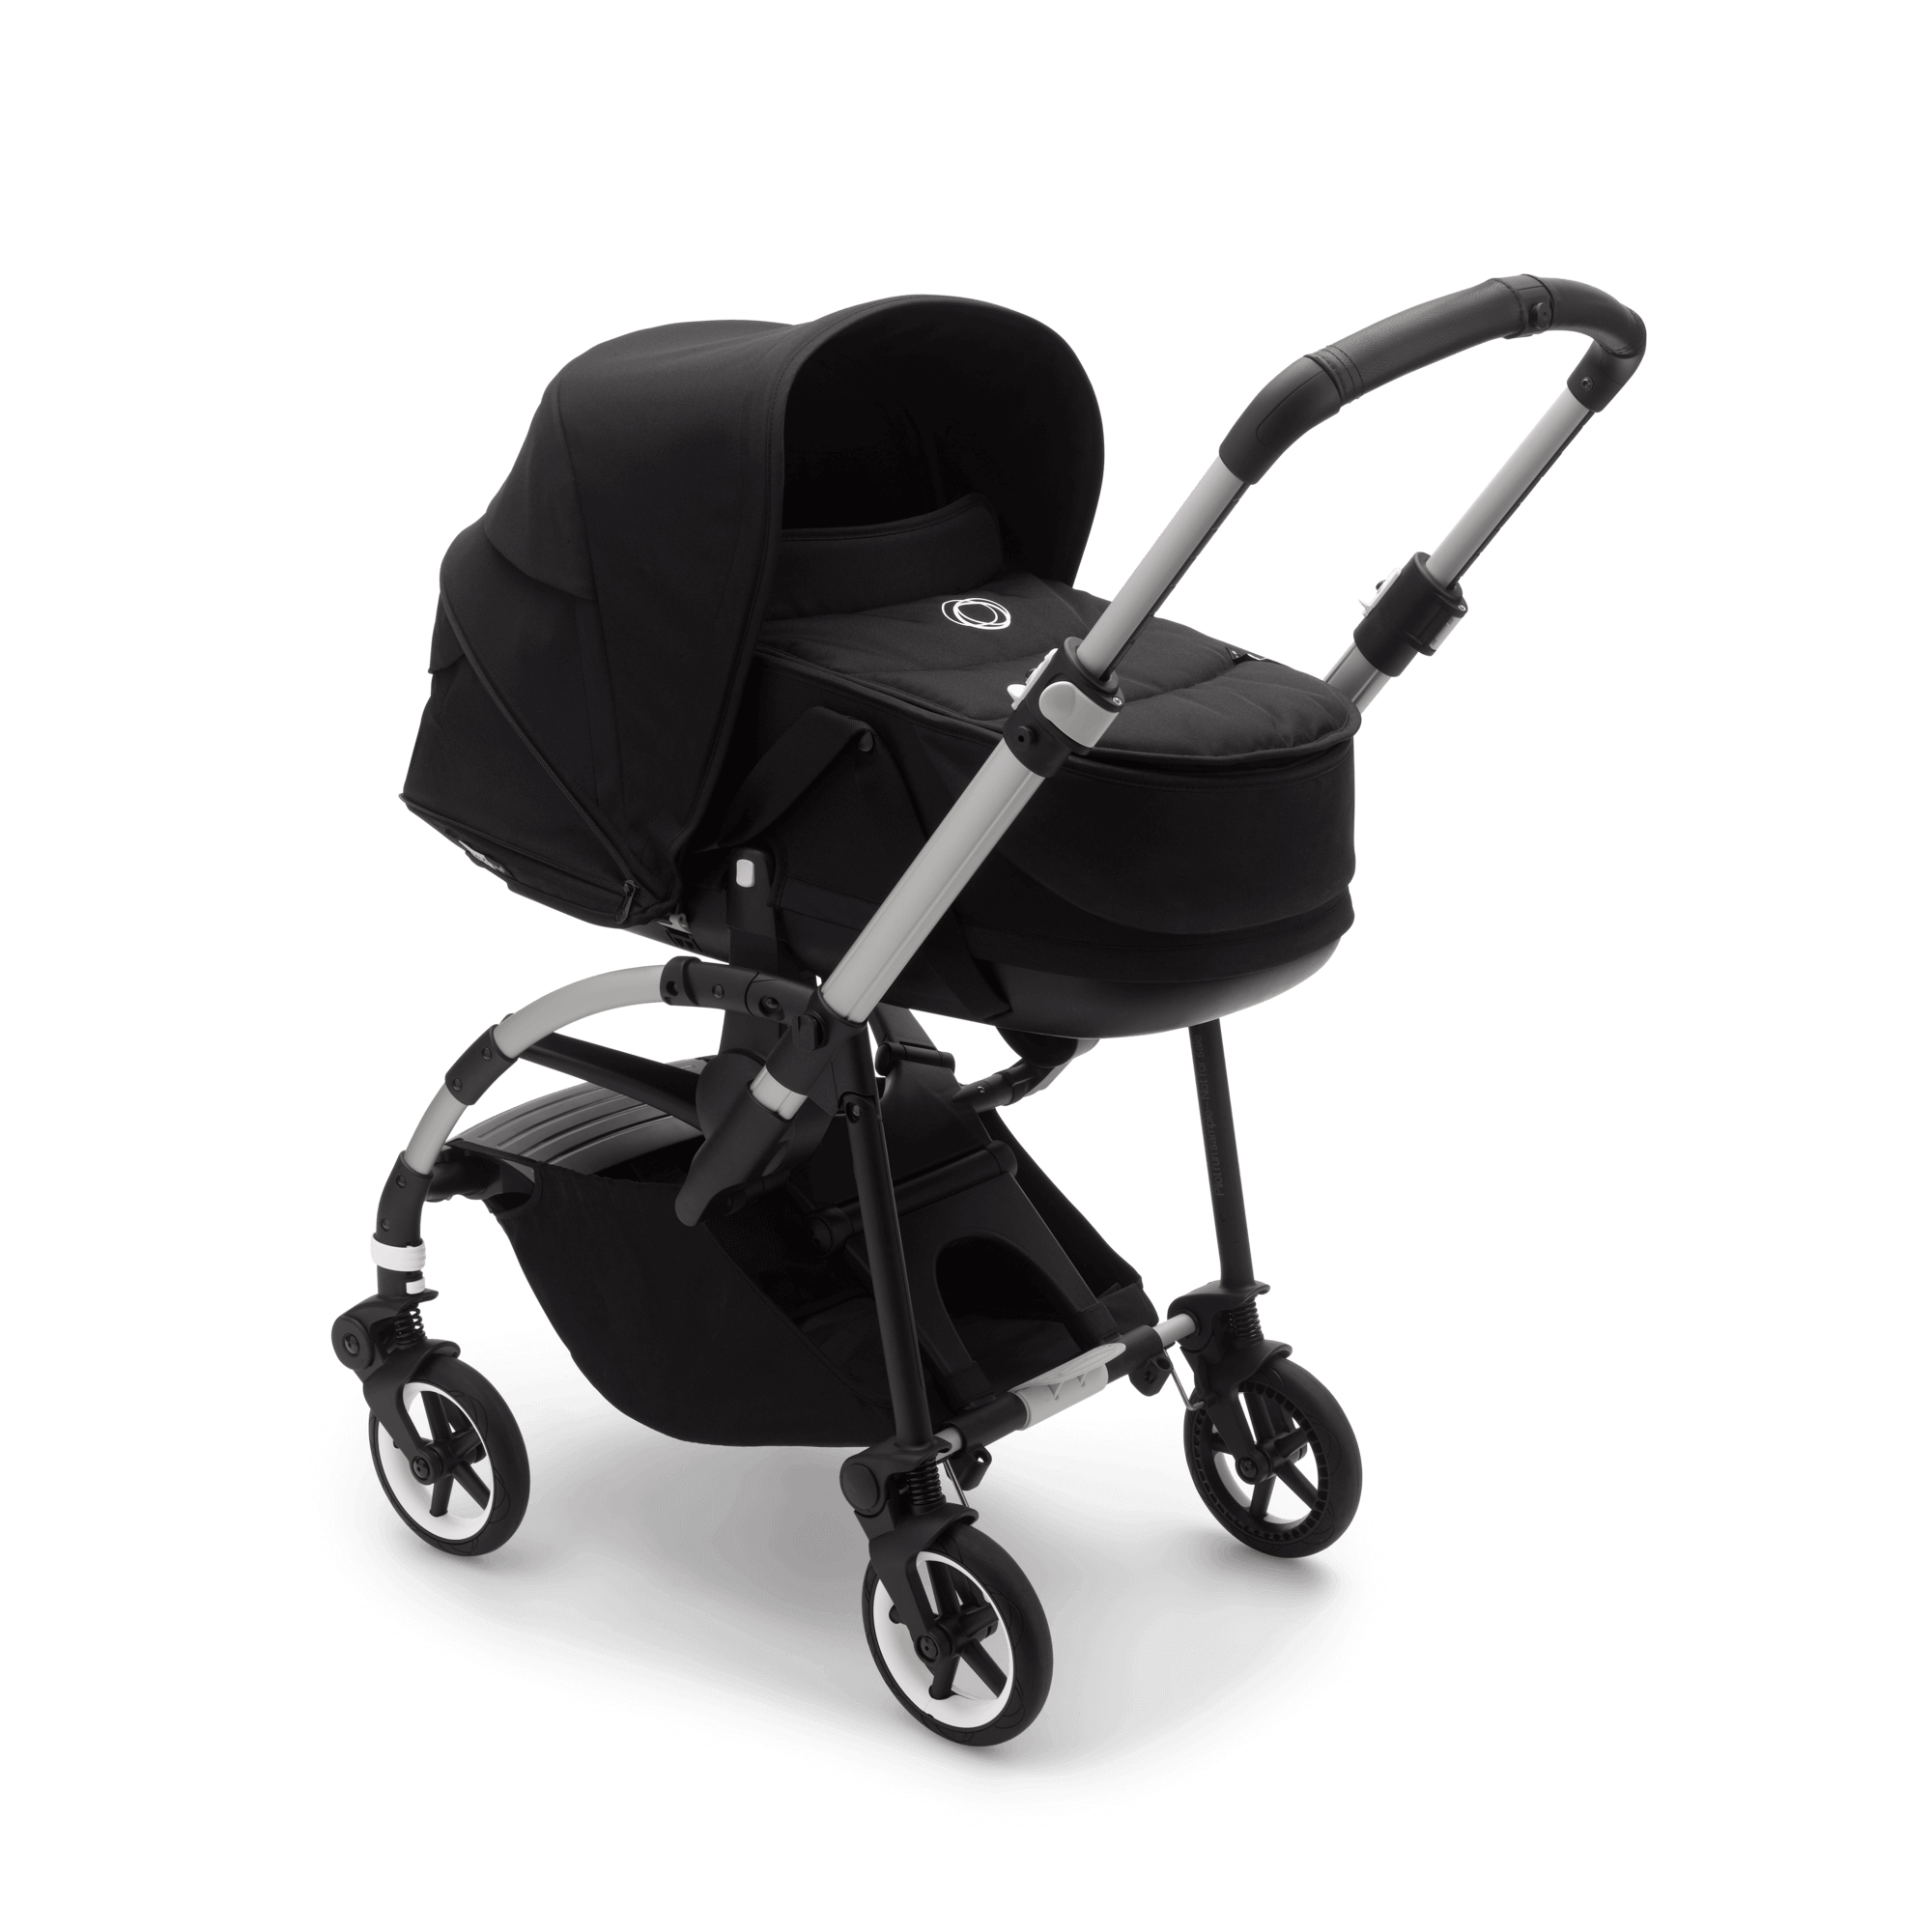 Bugaboo - Bee 6, to the rescue! From newborn to toddler, our most compact  city stroller will be that one thing they share with no struggle.​ #bugaboo  #bugaboostrollers #bugaboobee6 👉🏼